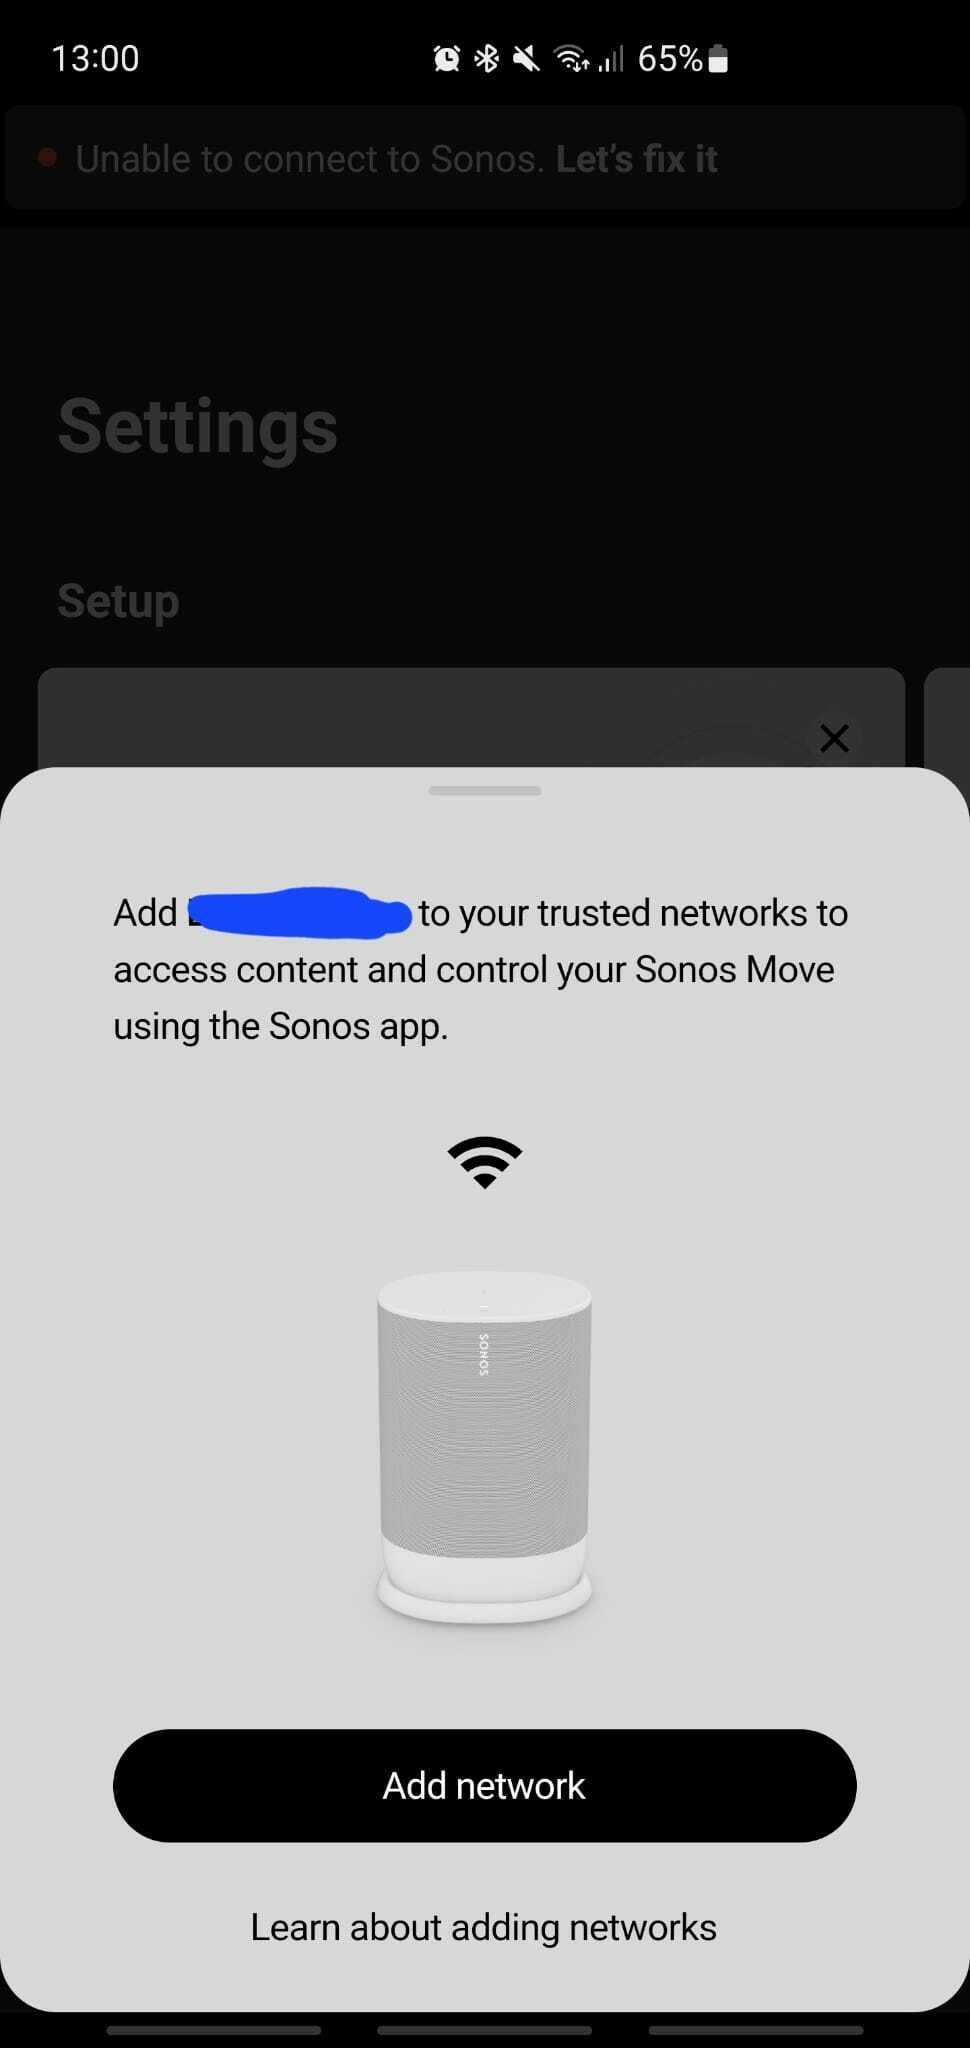 Sonos Move - Move between and work network (different wifi networks) | Sonos Community